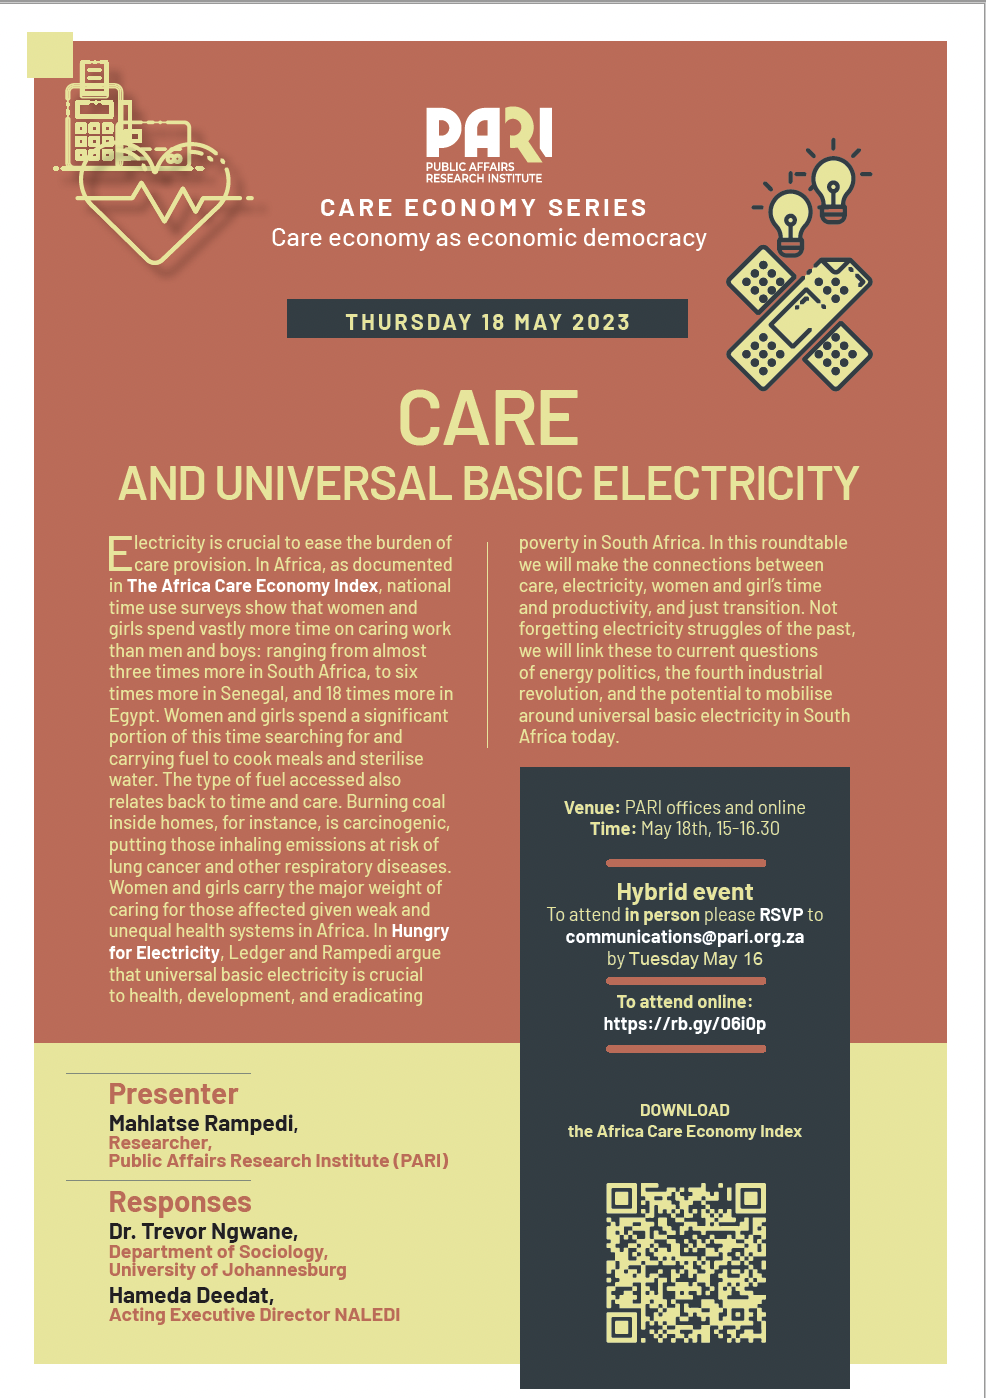 Watch | Care and Basic Universal Electricity